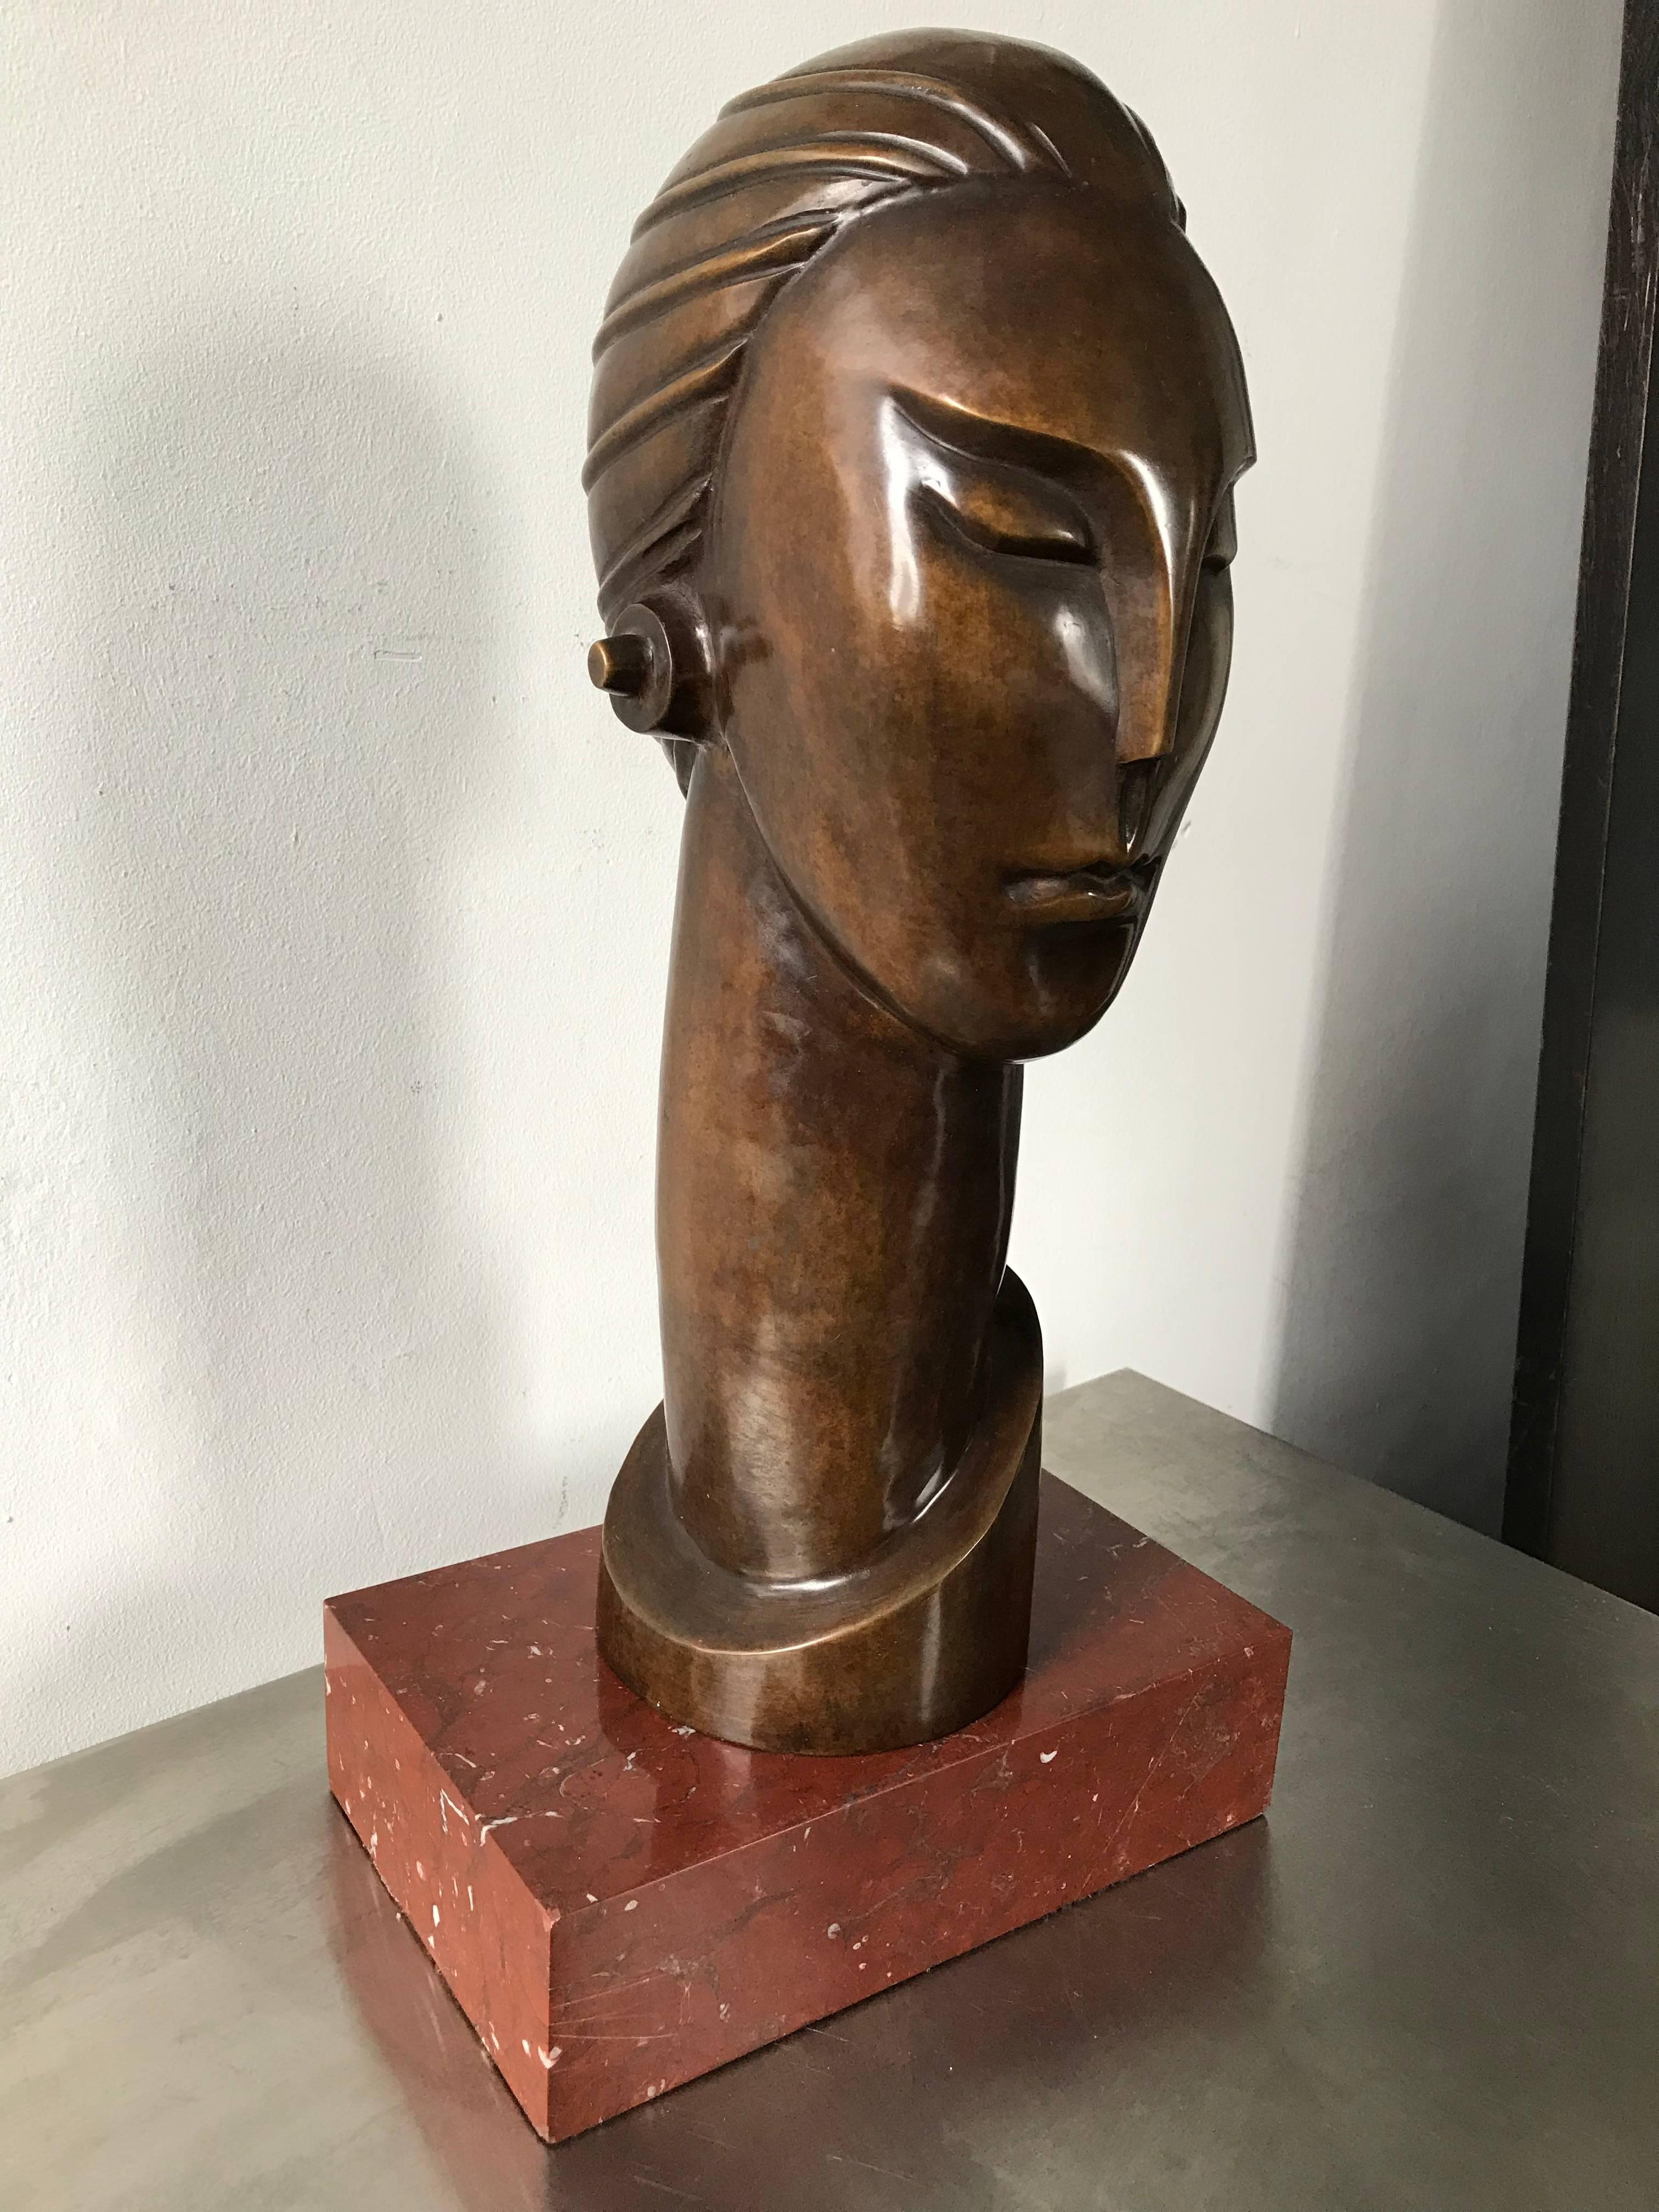 A fine Art Deco bronze bust after works by period artists Gustave Miklos, Joseph Csaky, and Constantin Brancusi. Futuristic or machine age qualities. Displayed on a red marble base. Unmarked.
Bust without base measures 16.5